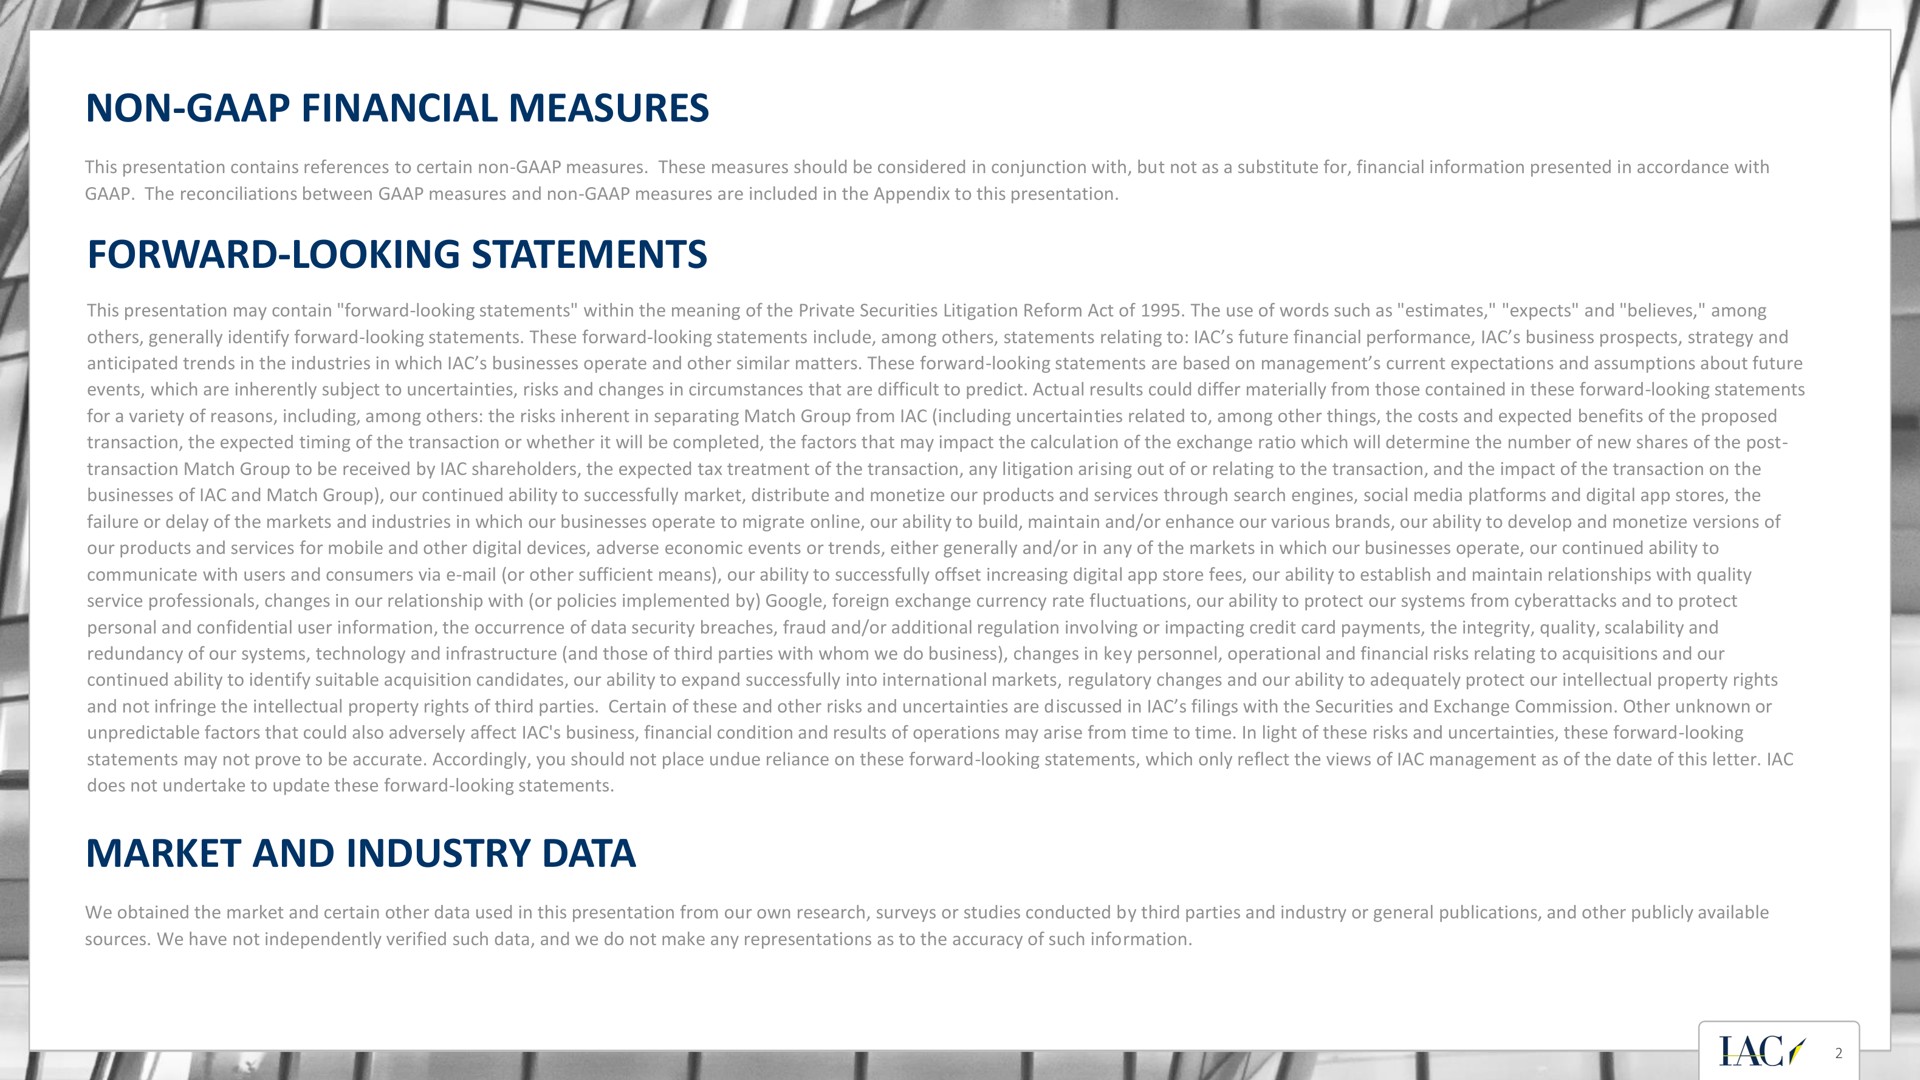 non financial measures forward looking statements market and industry data a | IAC